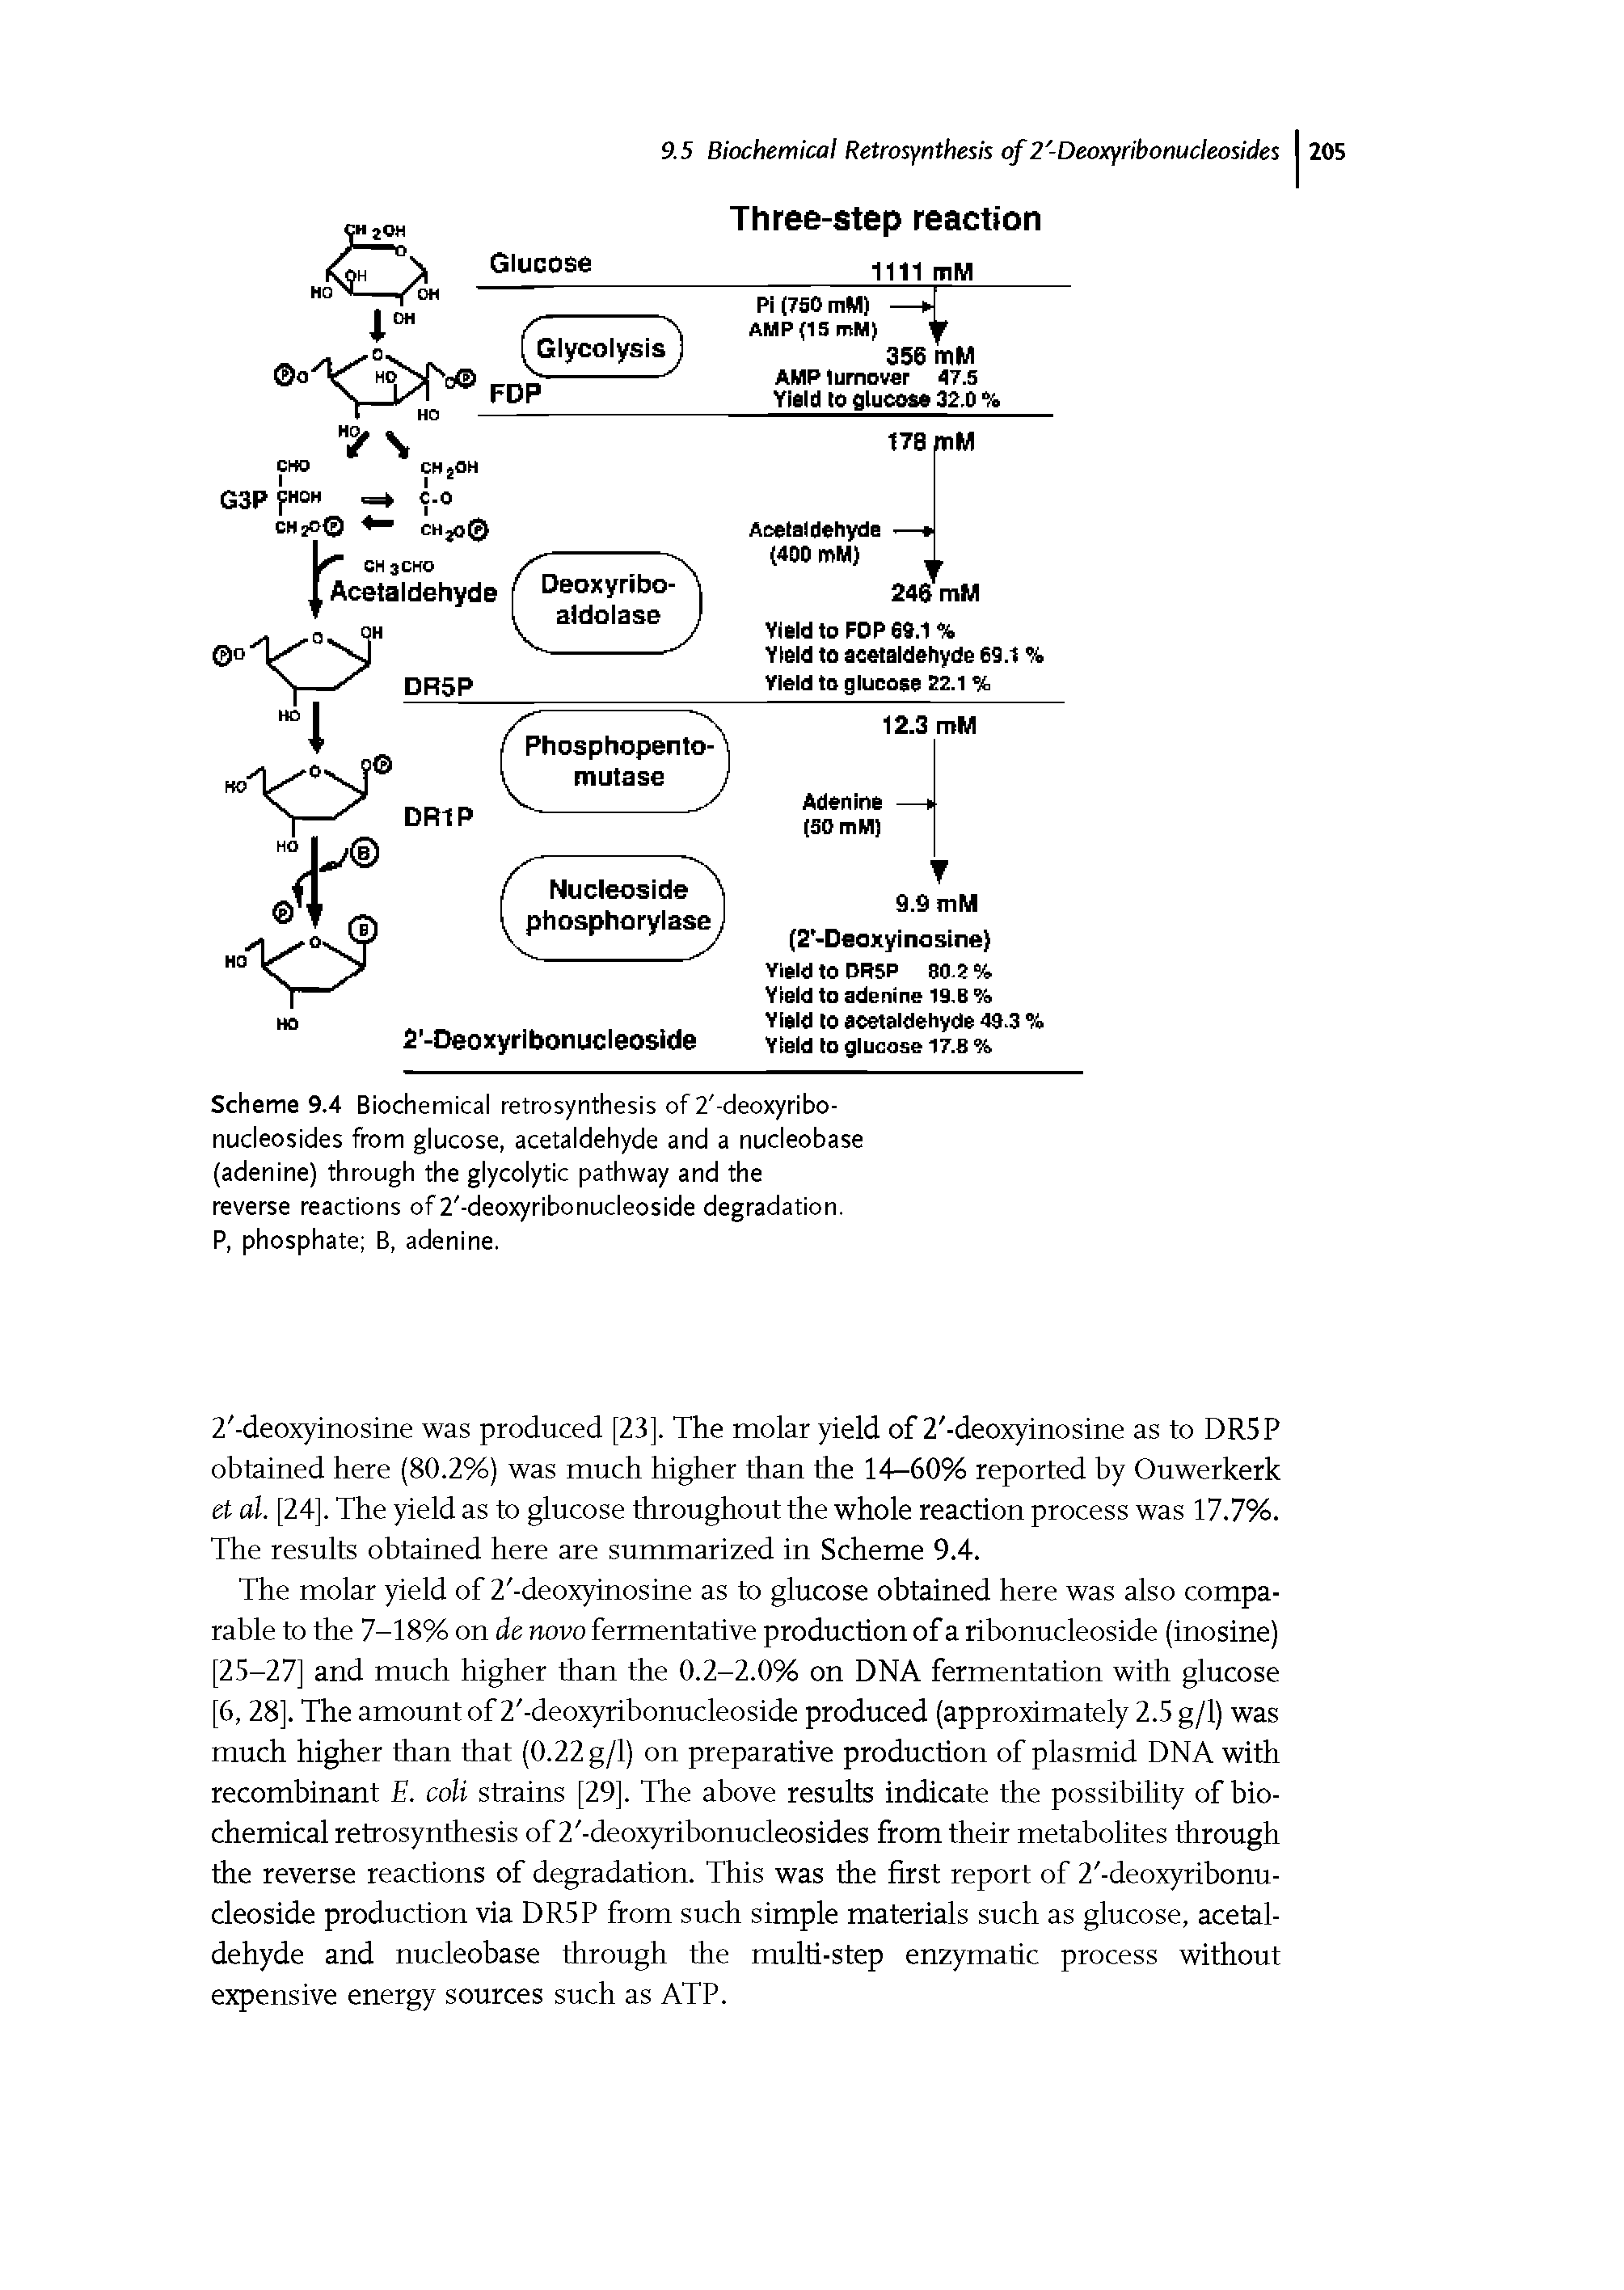 Scheme 9.4 Biochemical retrosynthesis of 2 -deoxyribo-nucleosides from glucose, acetaldehyde and a nucleobase (adenine) through the glycolytic pathway and the reverse reactions of 2 -deoxyribonucleoside degradation.